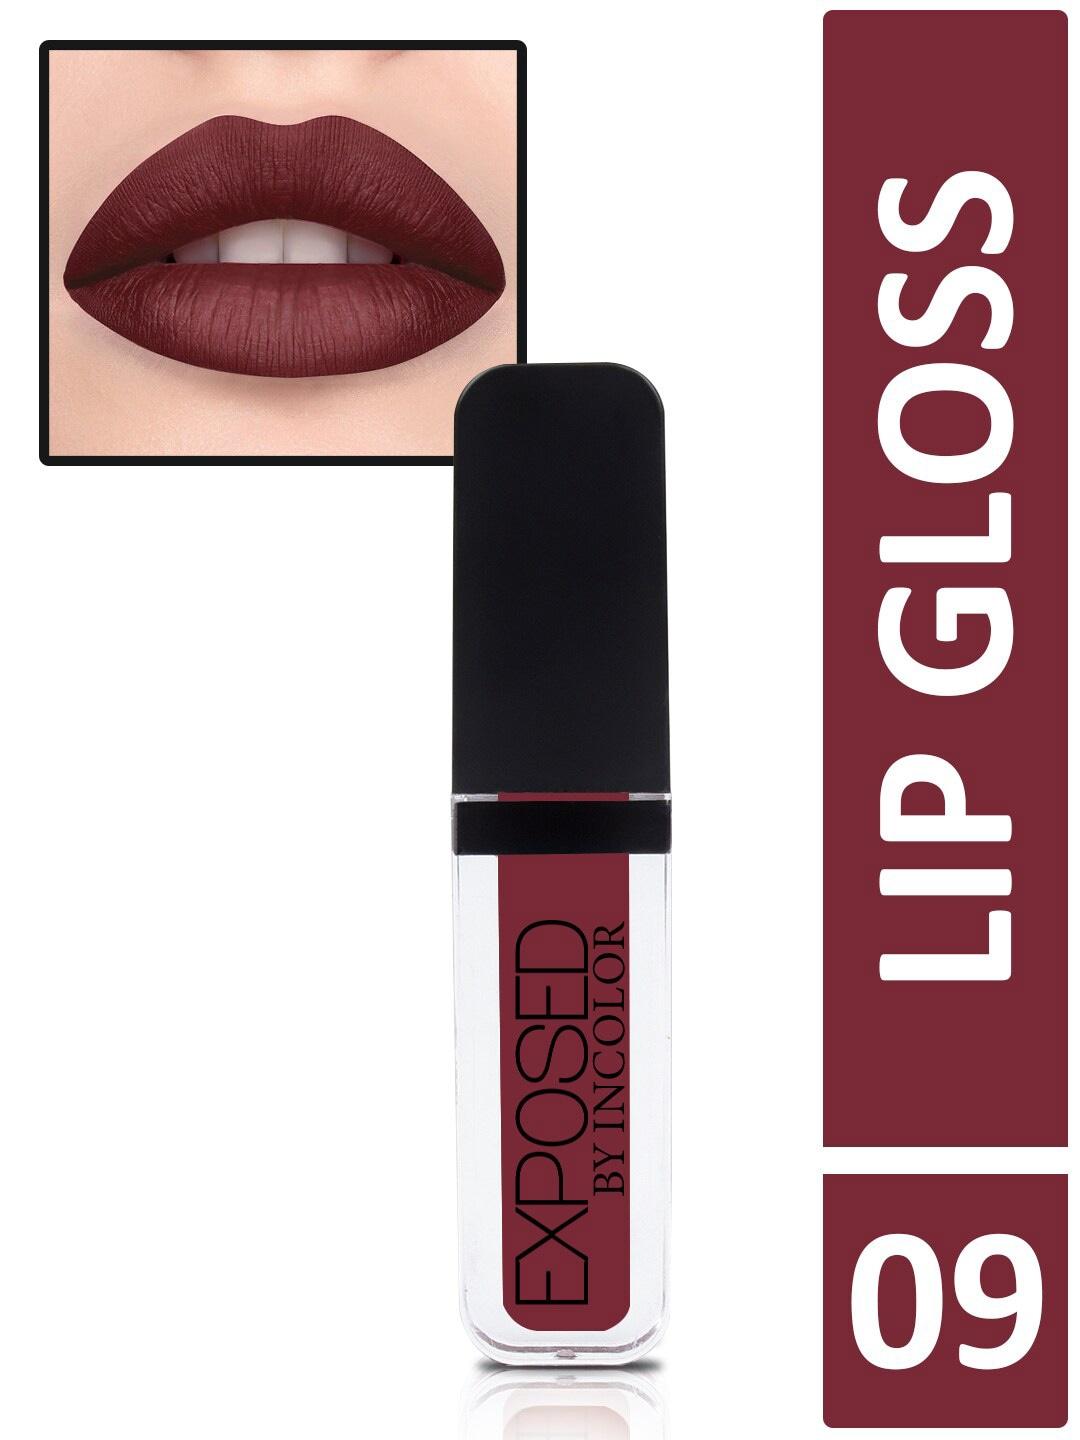 incolor-exposed-soft-matte-lip-gloss-09-6-ml